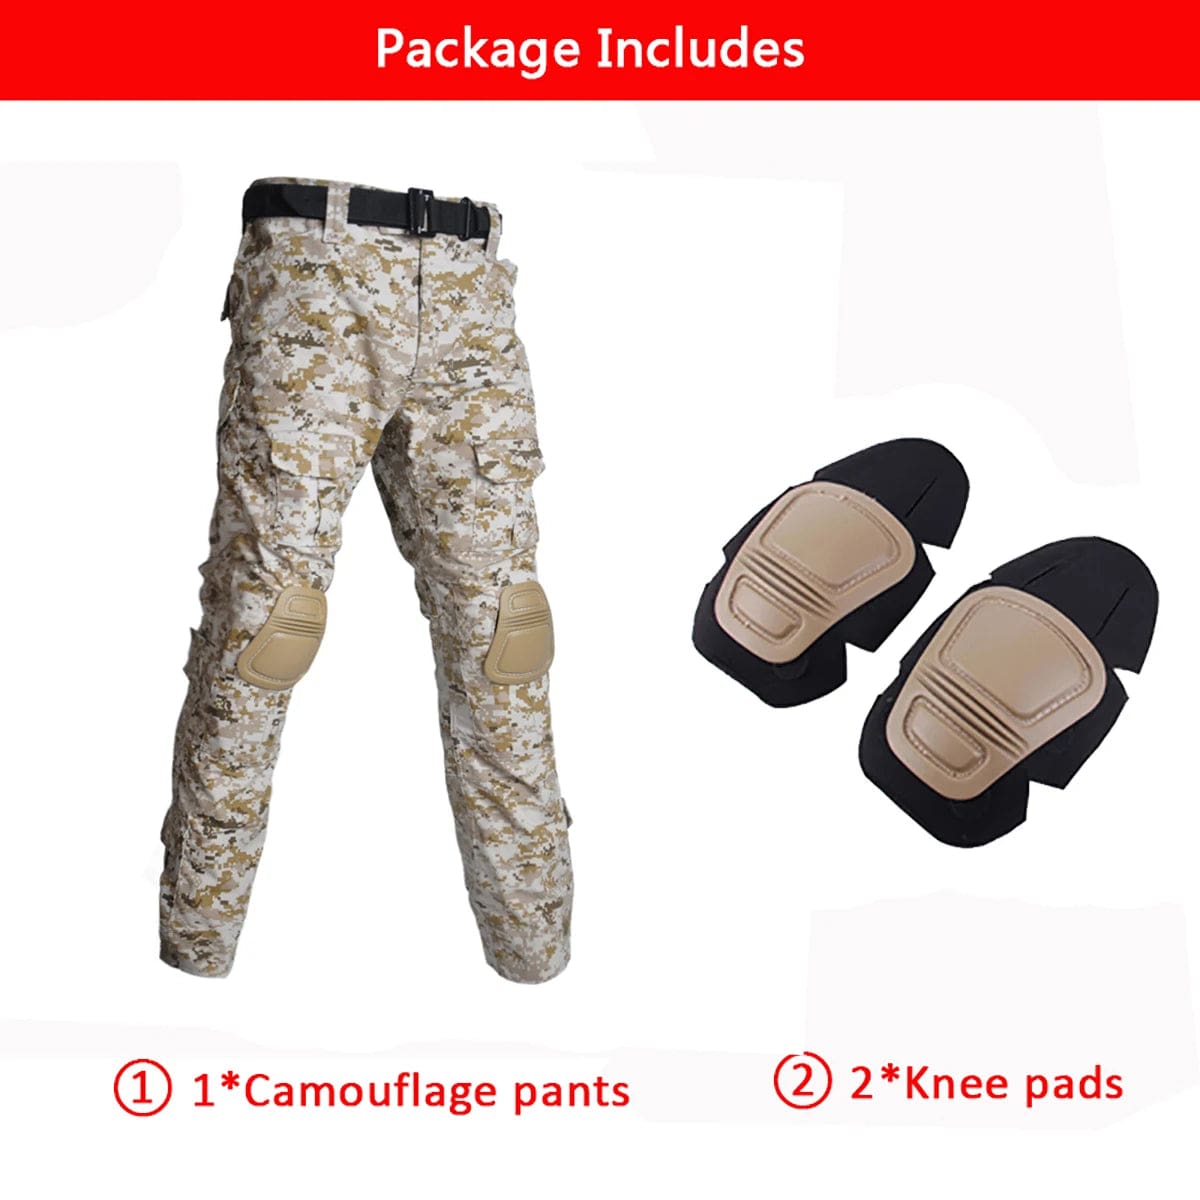 ACTION AIRSOFT desert python 1 / S(50-60kg) Airsoft Uniform Tactical Suits Army Camouflage Pants Military Clothing Hunting Clothes Paintball Suits Combat Shirt Pants +Pads